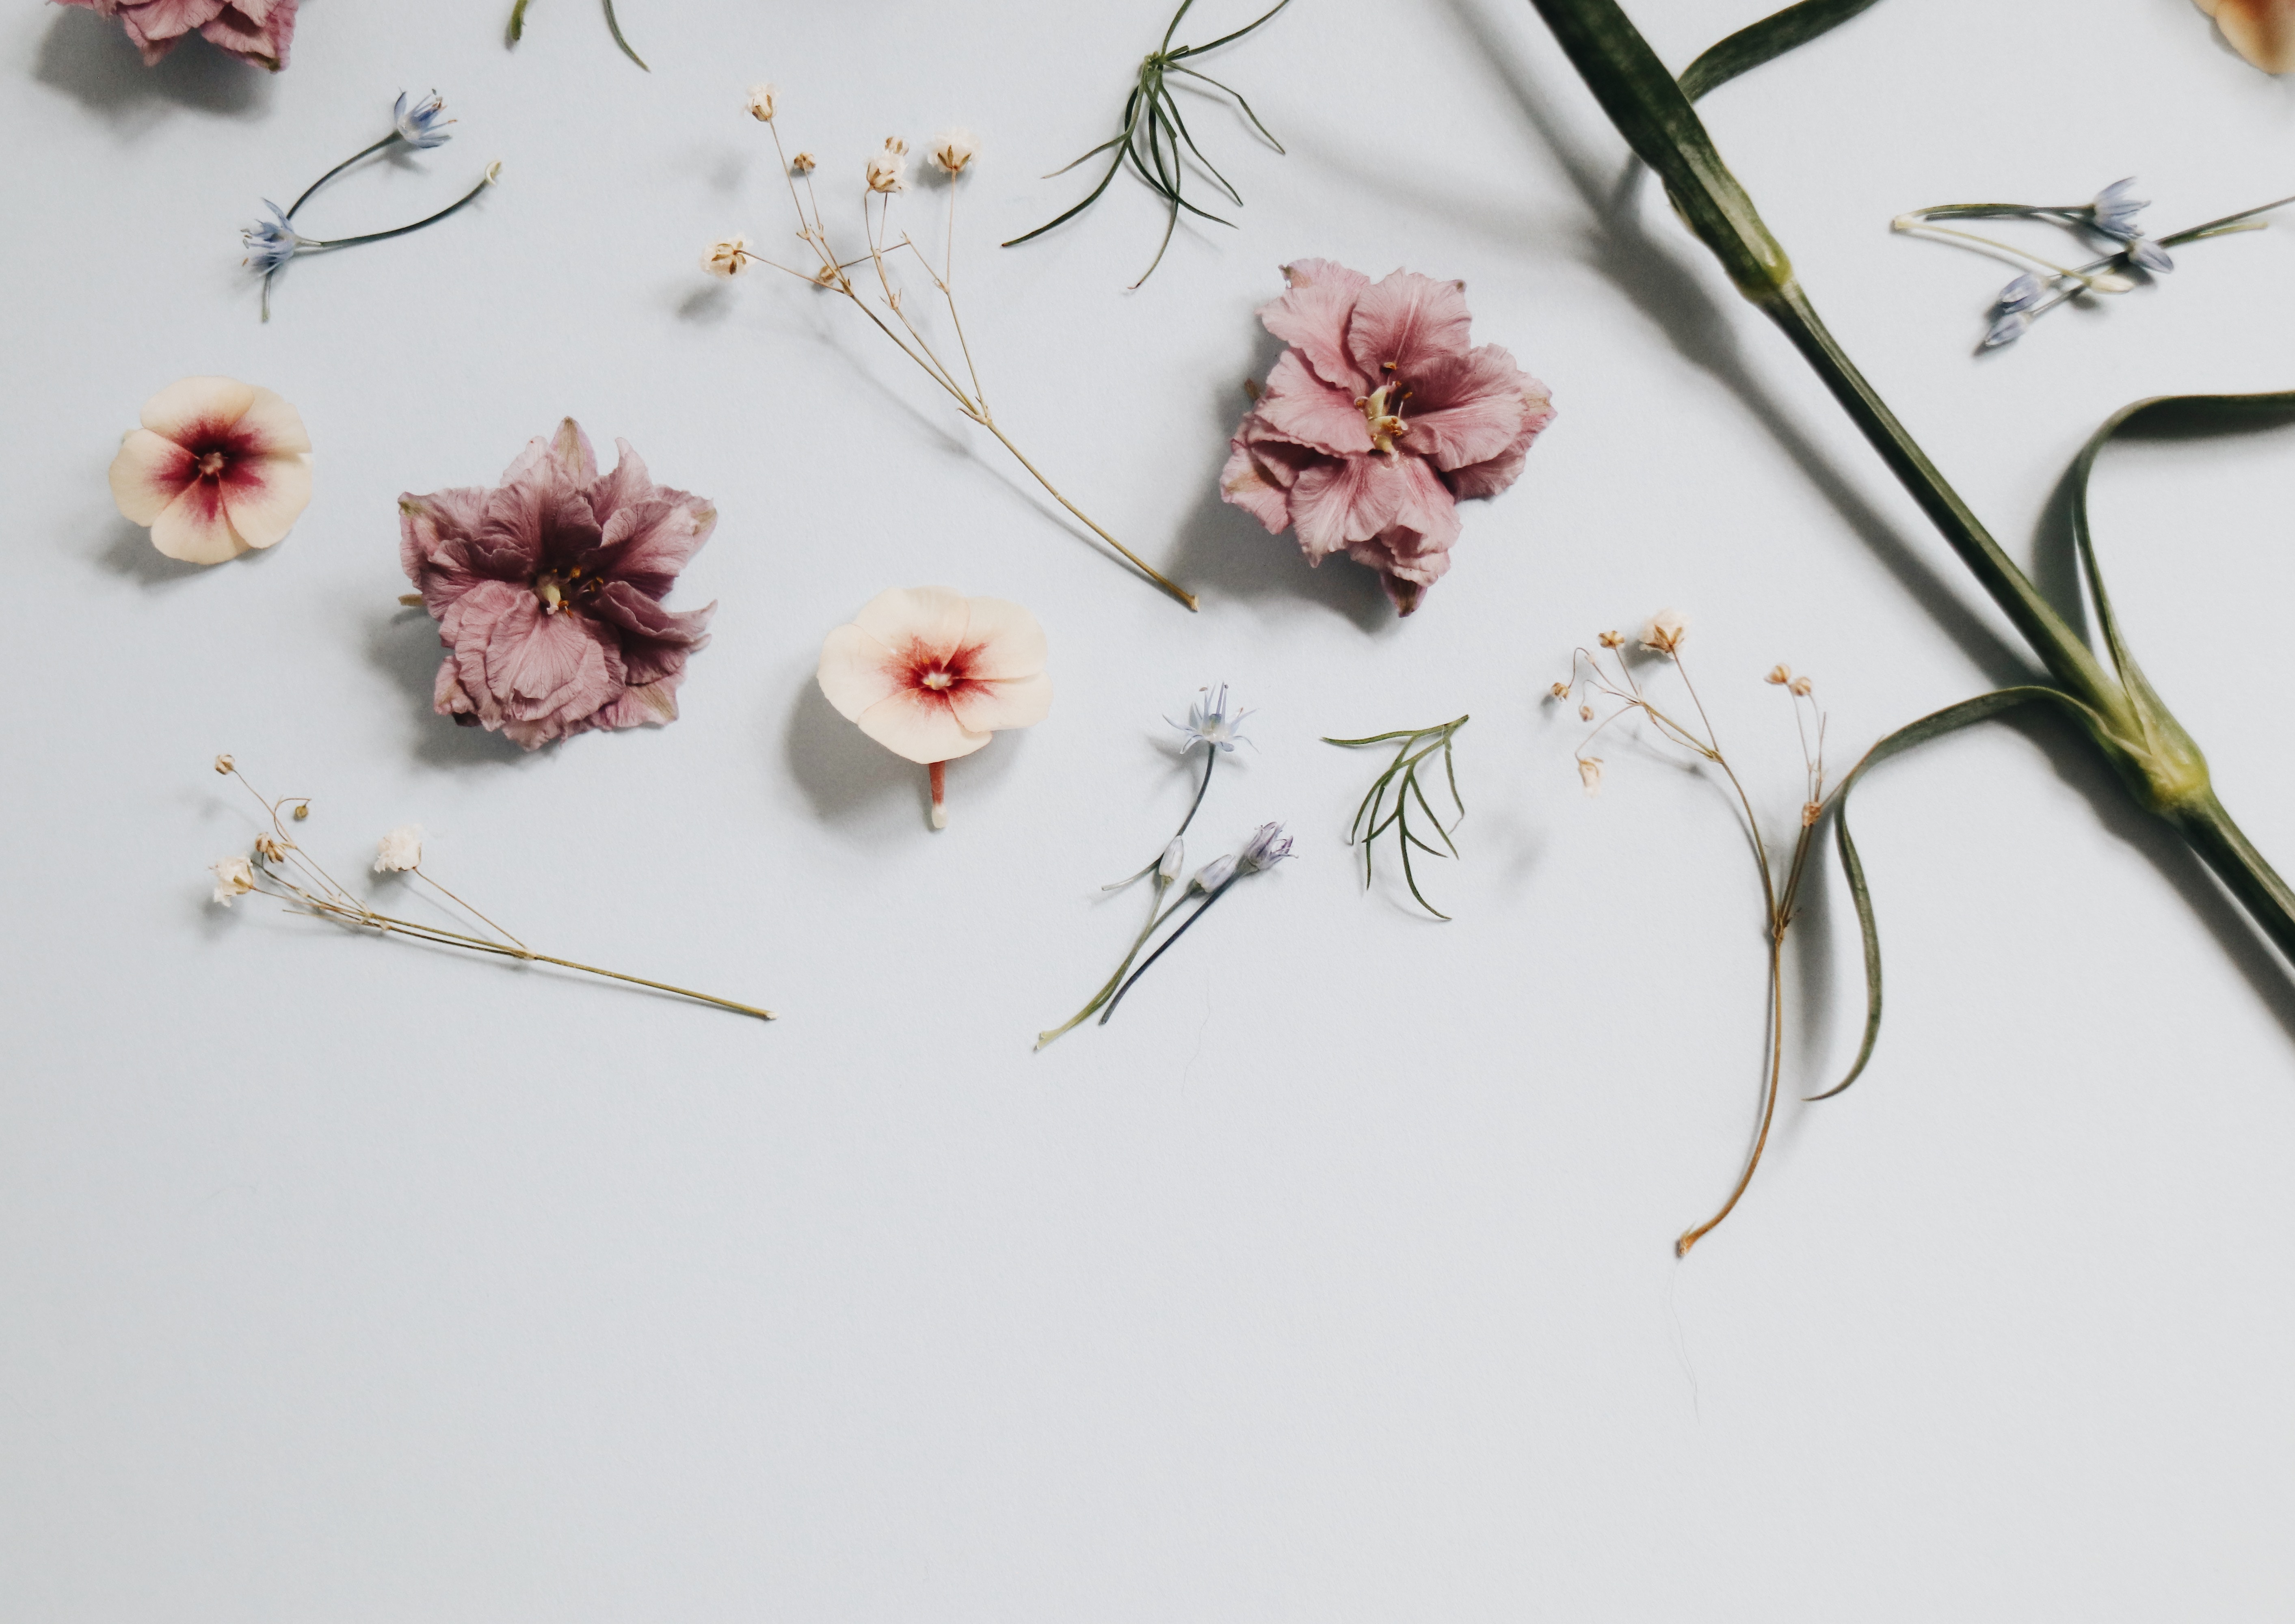 5651x4000 #minimal, #dired flower, #dried flower, #flatlay, #blossom, #floral, #art, #white, #plant, #contrast, #bud, #Free , #minimalist, #stem, #flower, #white background, #flat lay, #petal, #natural, #blosson. Mocah HD Wallpaper